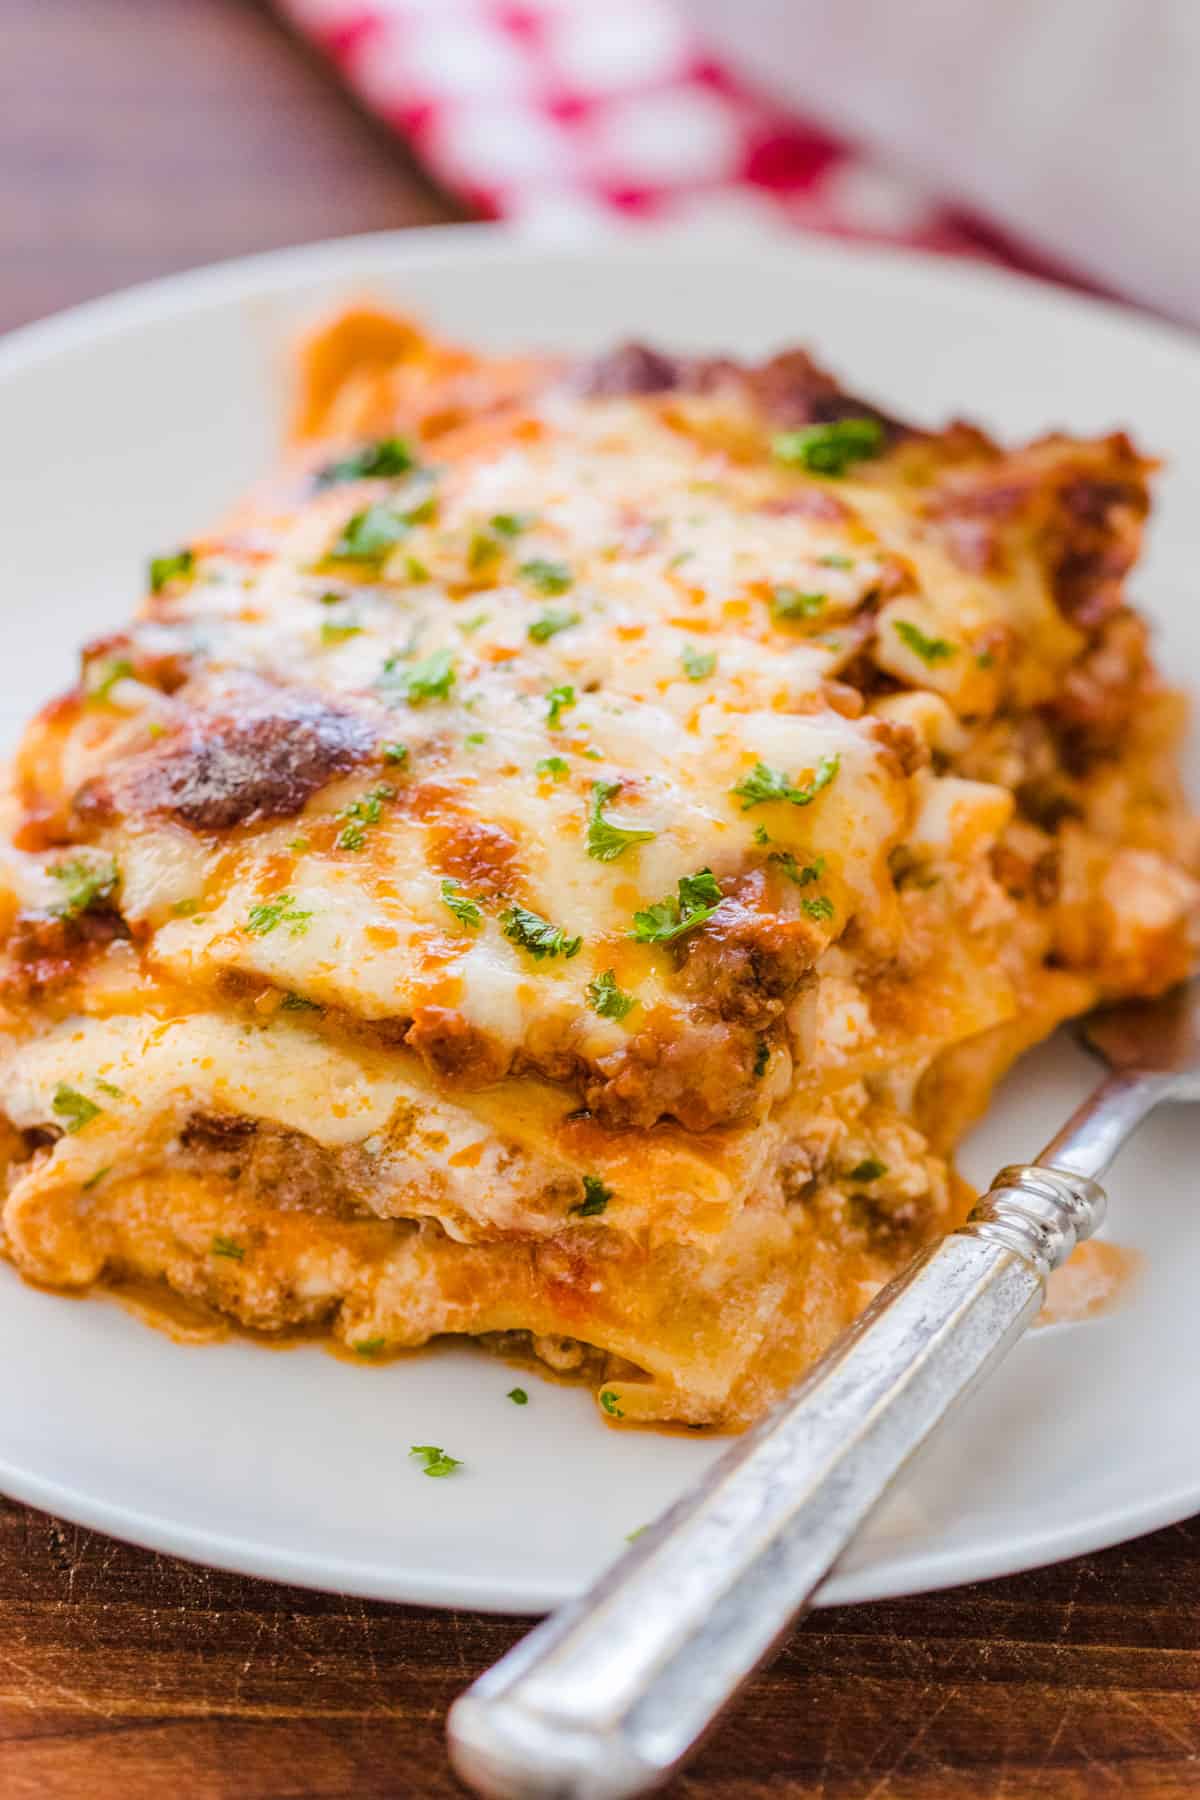 Lasagna on plate with fork